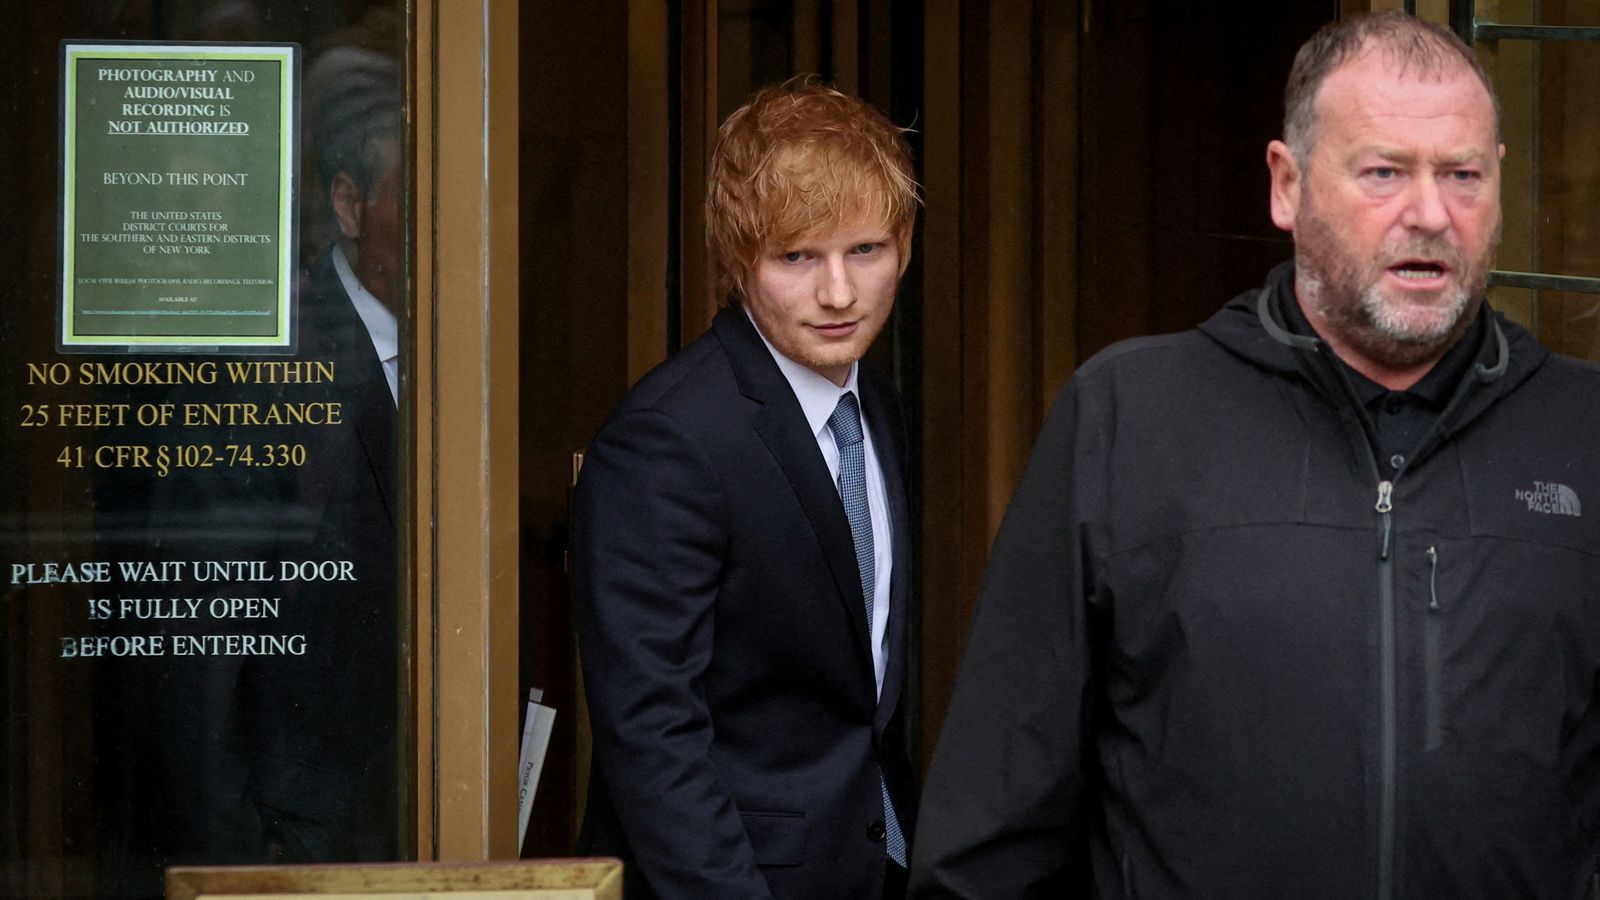 Ed Sheeran copyright trial: Star says other singers are cheering him on